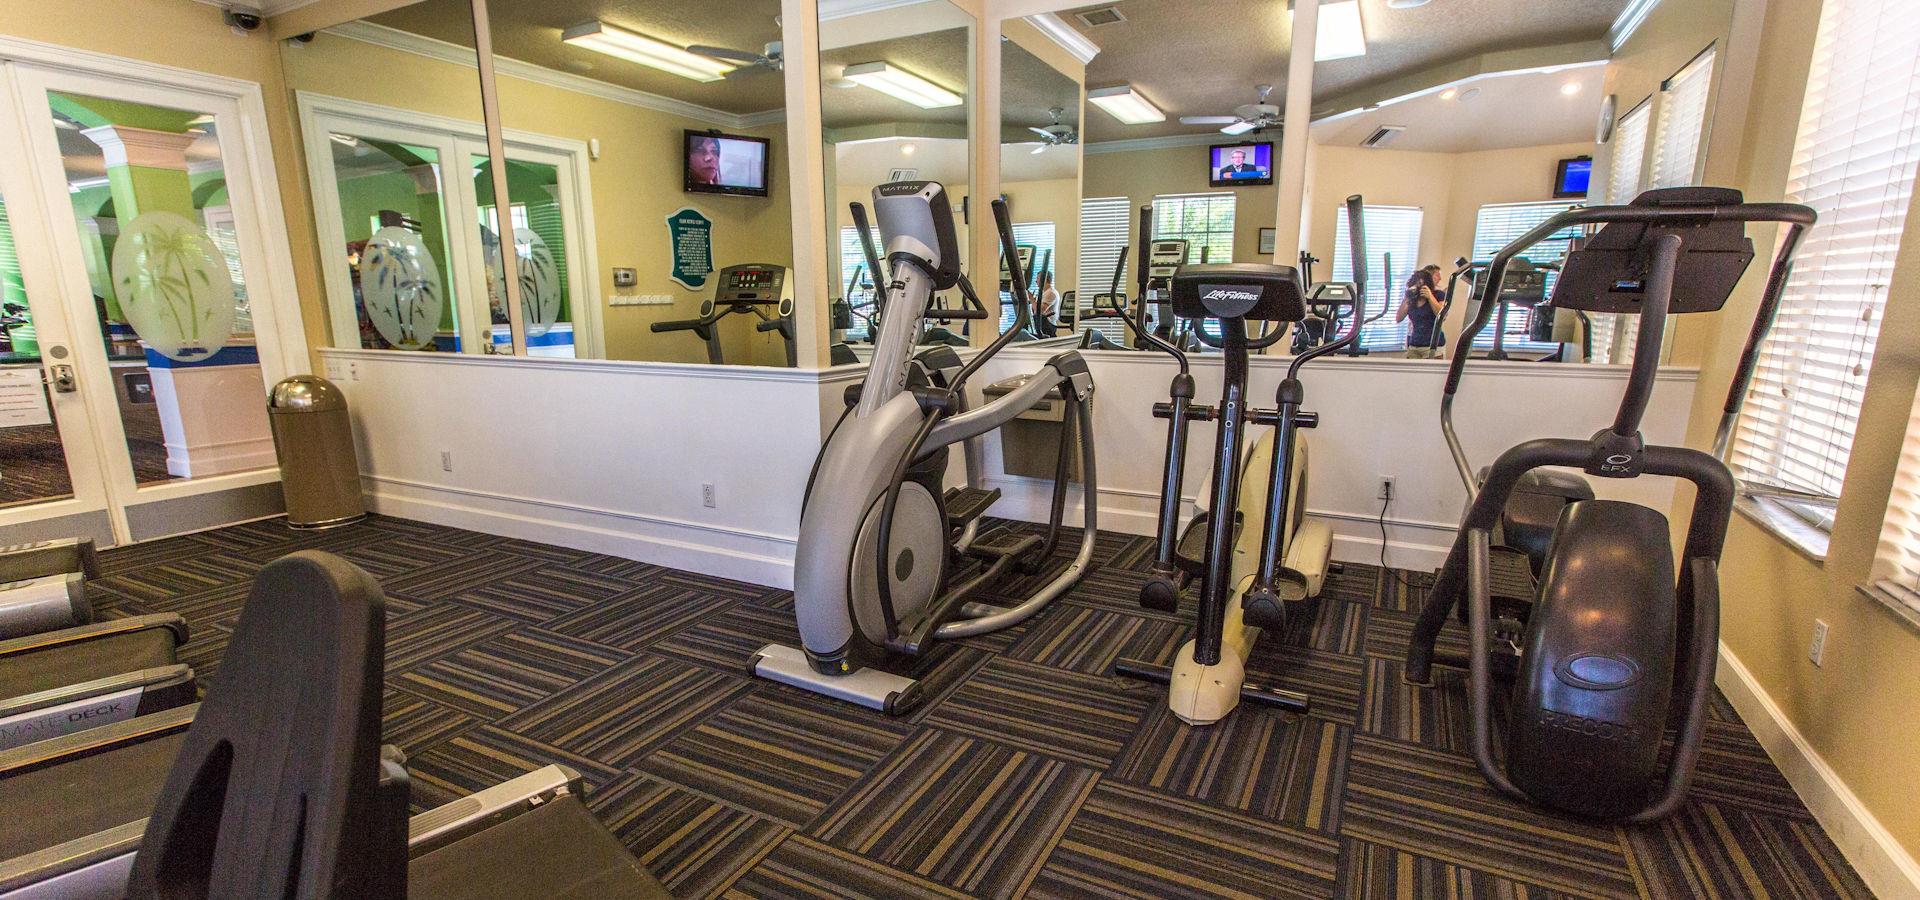 Fitness Room and Gym